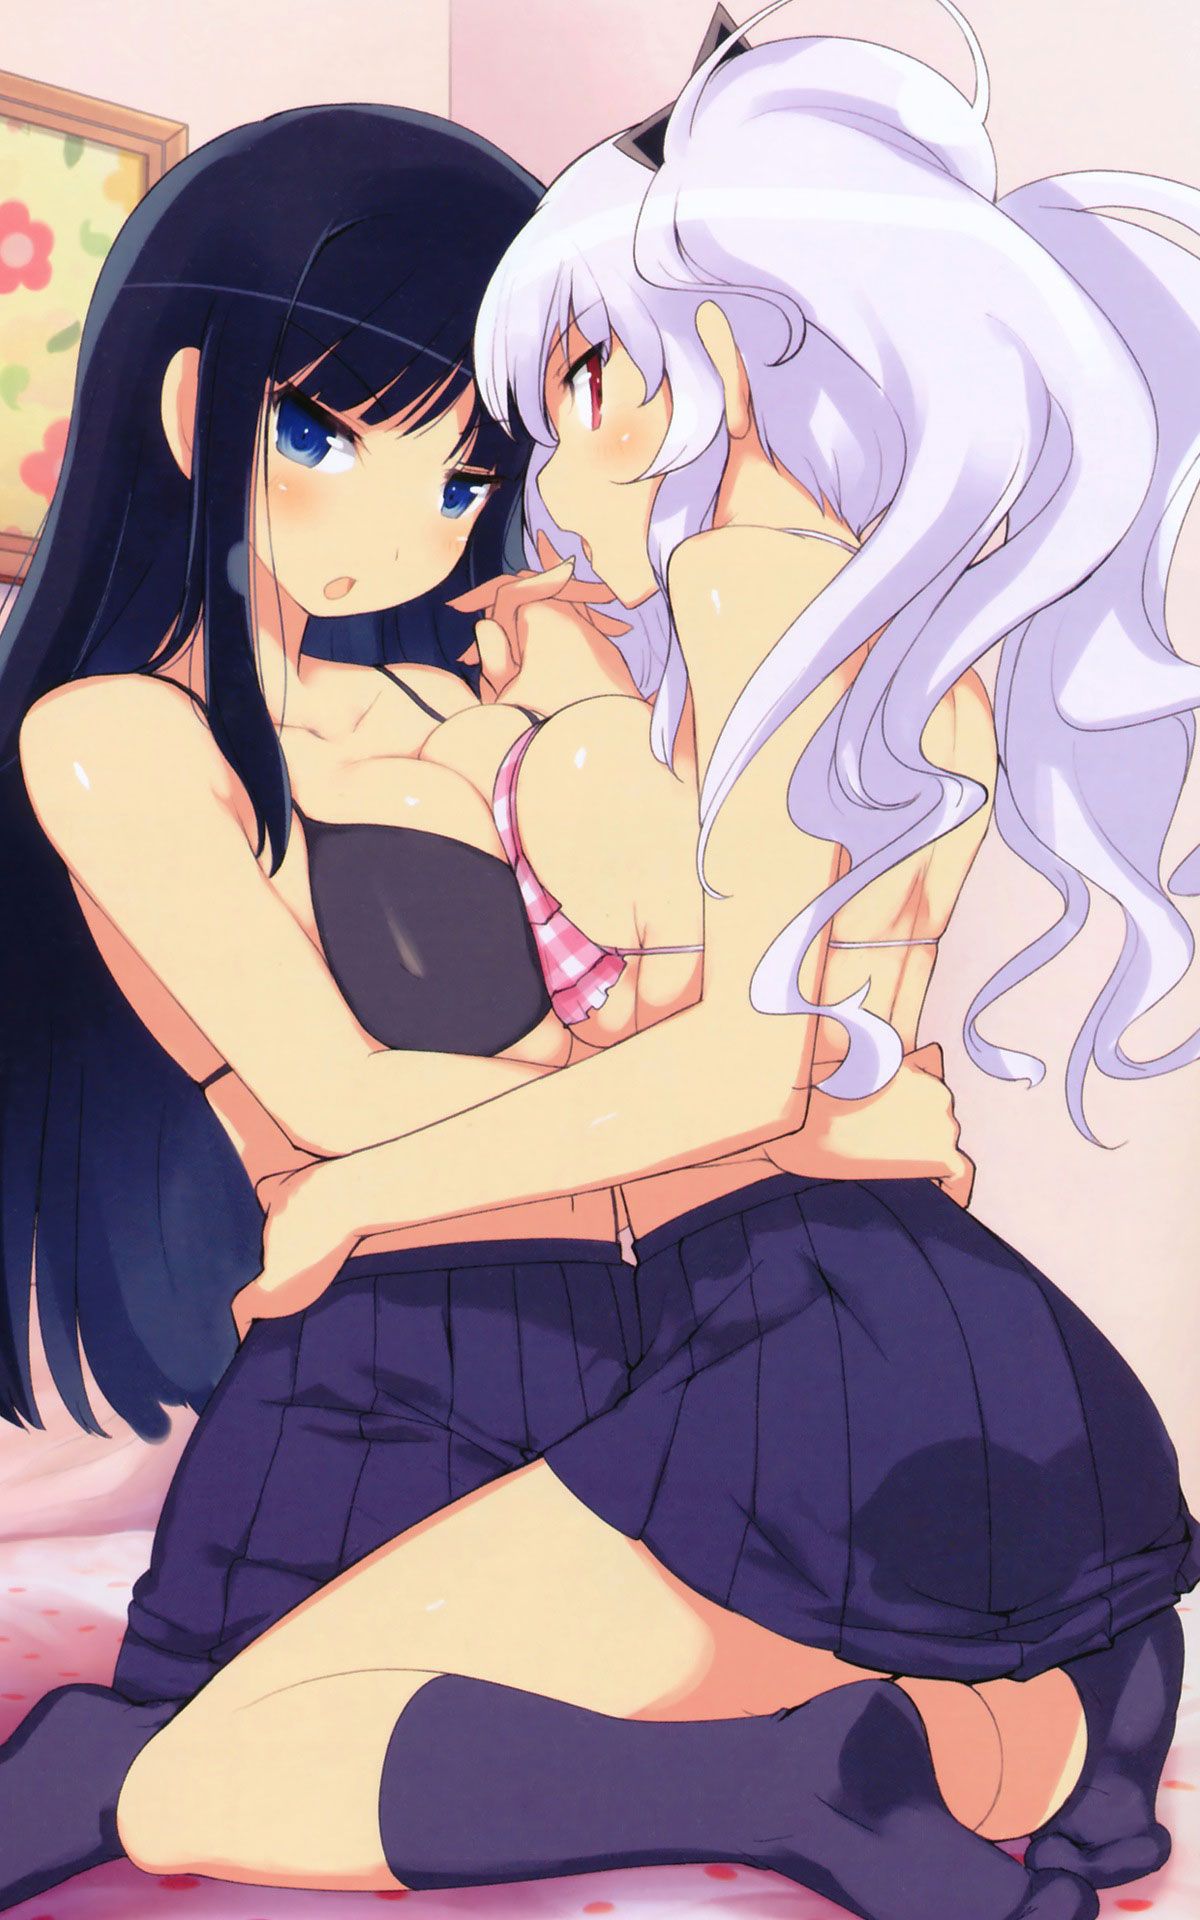 Yuri and Lesbian secondary image wwww to be naughty in girls each other 4 29